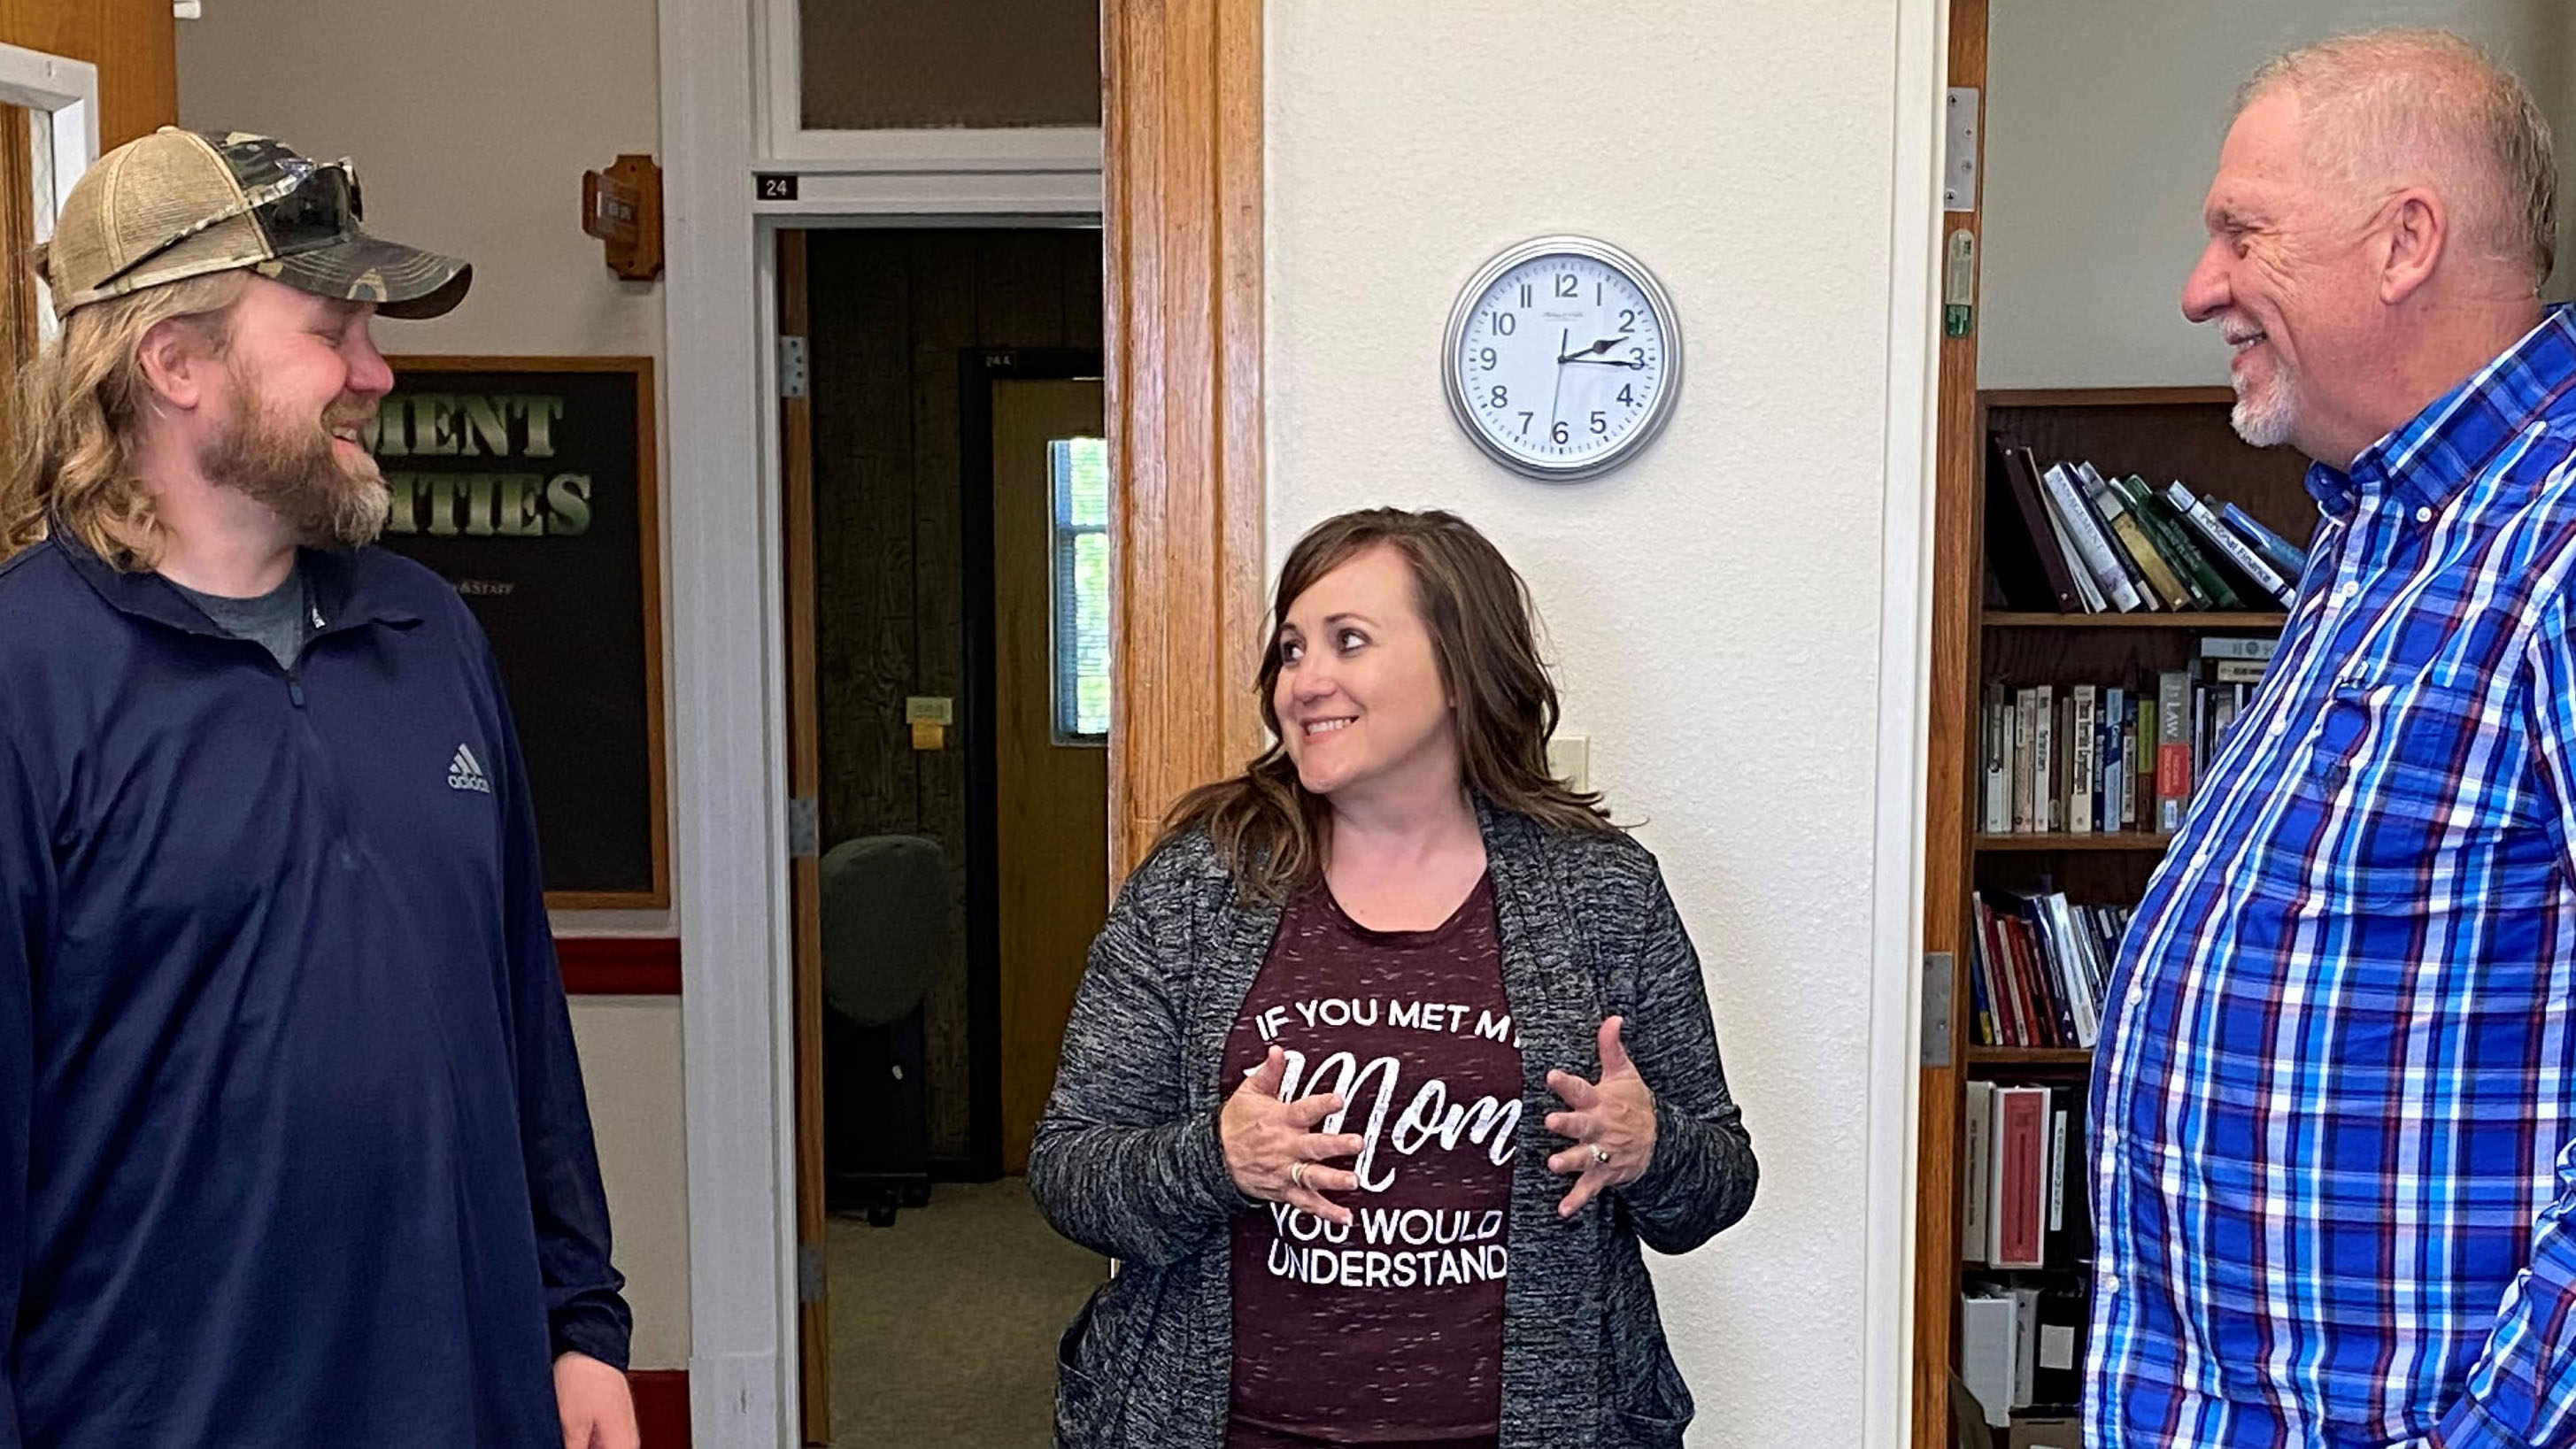 NCTA Dean Larry Gossen, on right, visits with Jeremy Sievers, agribusiness professor, and Associate Dean Jennifer McConville at Ag Hall during a visit in early May. (NCTA photo)